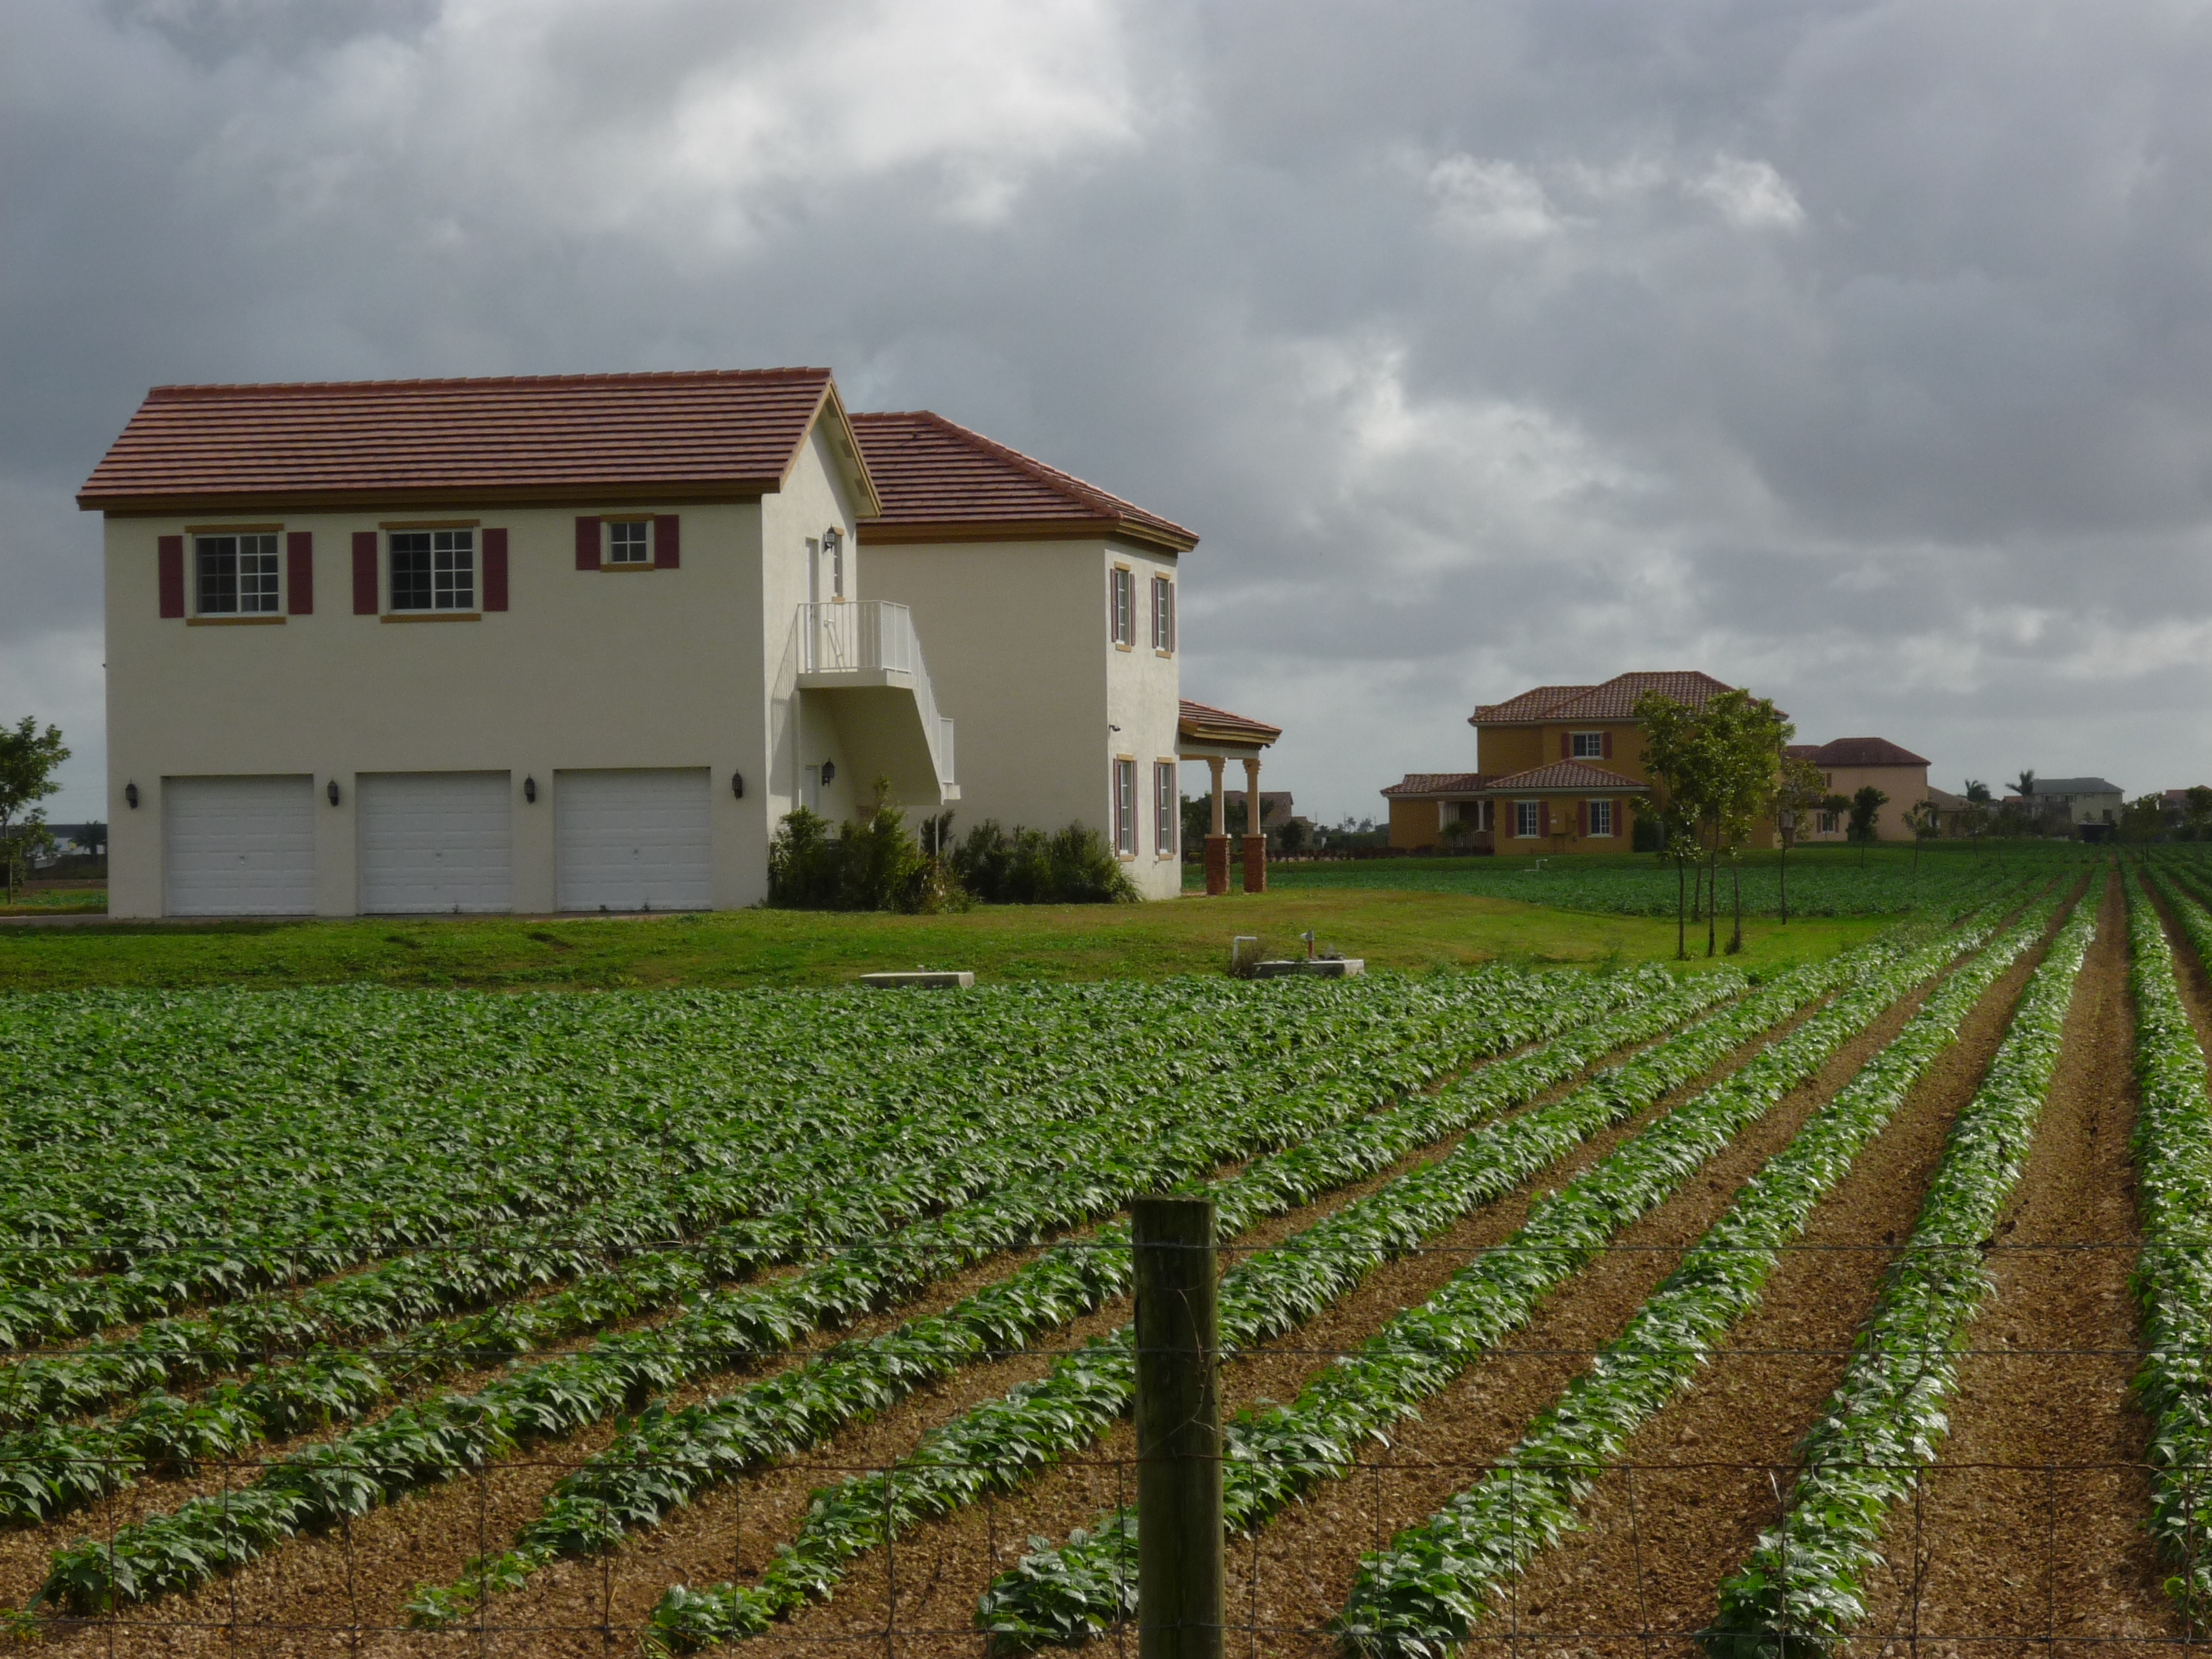 Commercial farm surrounding a new residential development